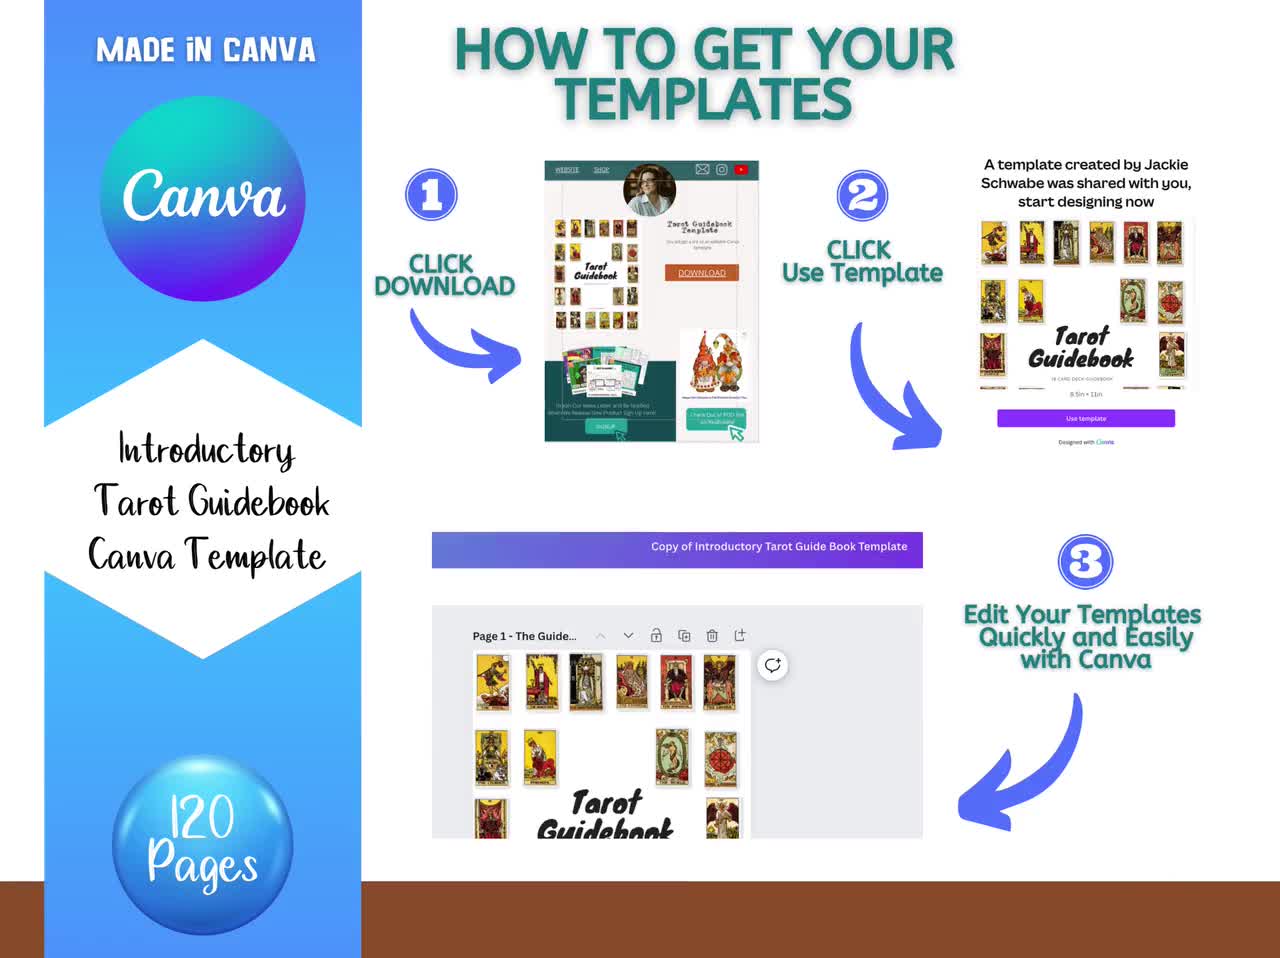 PLR - Guided Tarot Journal Canva Template (Commercial Use)